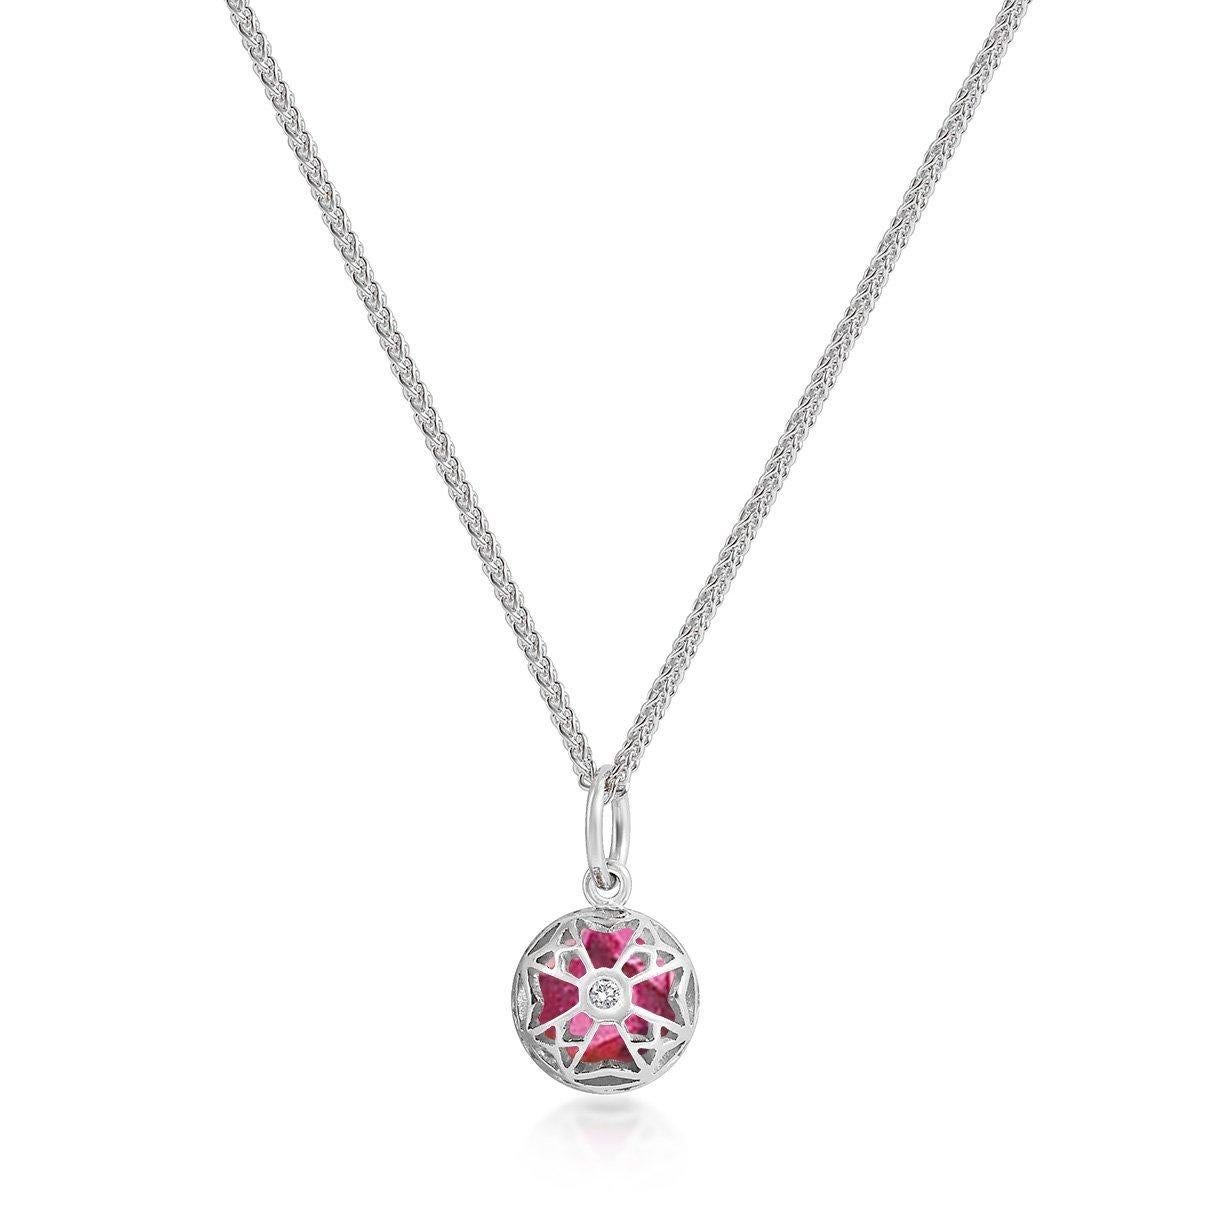 Handcrafted 1.30 Carats Pink Tourmaline 18 Karat White Gold Pendant Necklace. The 7mm natural stone is set in our iconic hand pierced gold lace to let the light through. Our pendants are the ideal gift. 

Here presented on our finely knitted gold